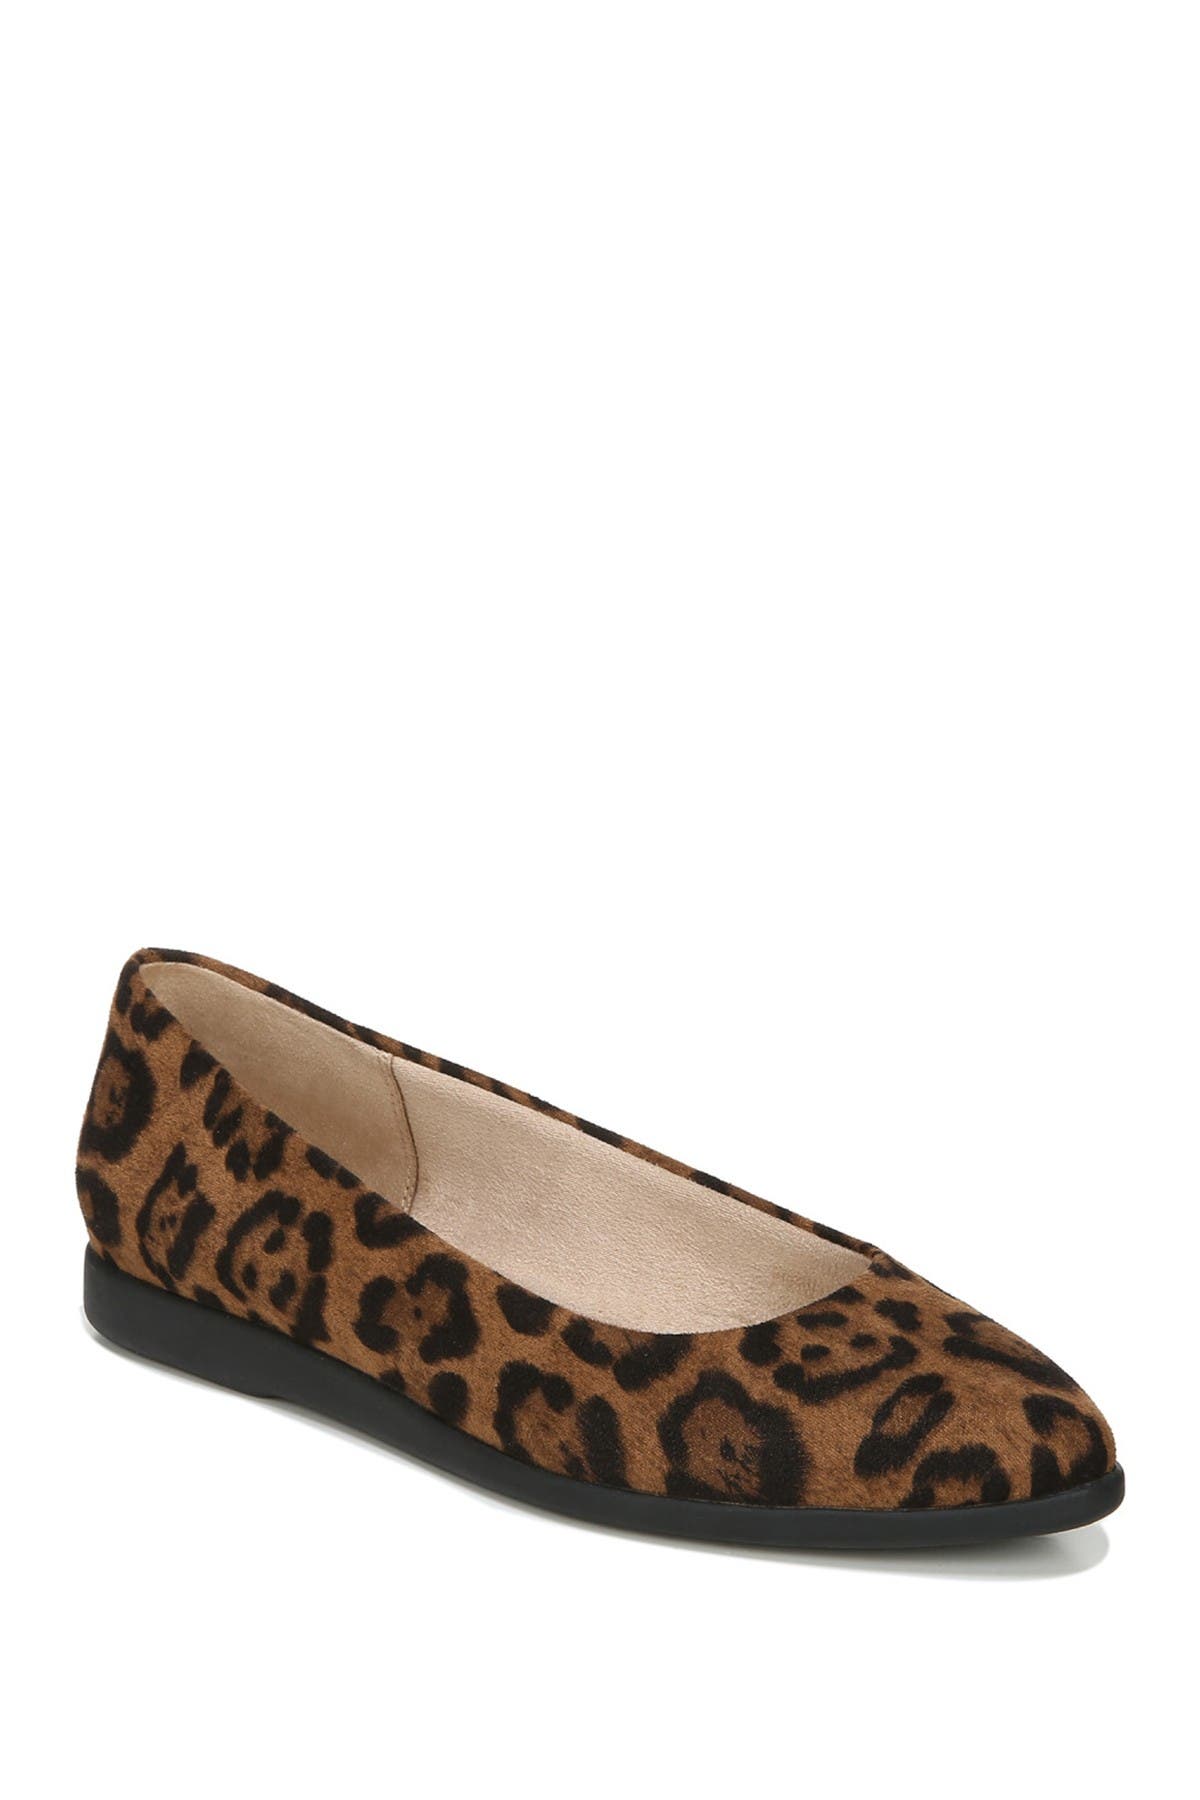 leopard print pointed toe flats